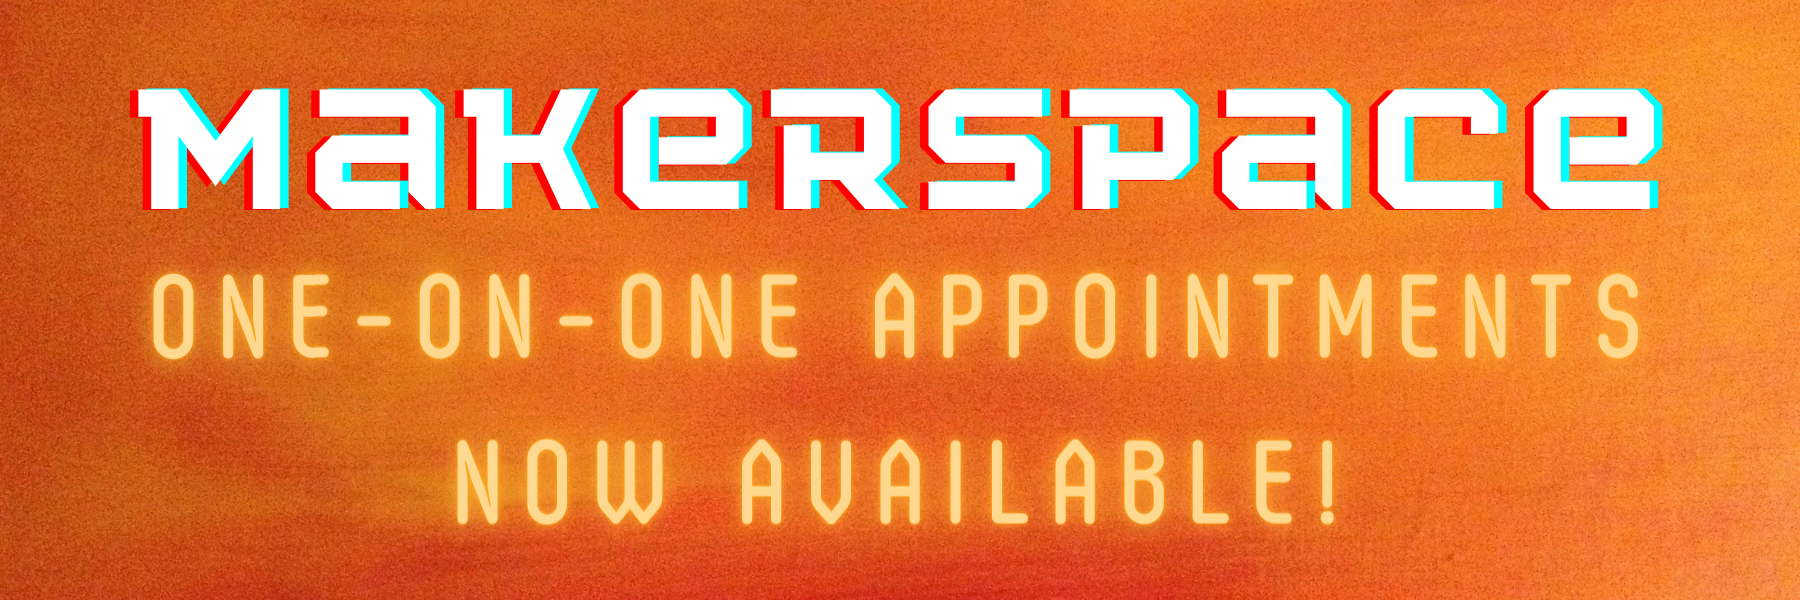 The words "MAKERSPACE: One on One Appointments now available!" over an orange background. 